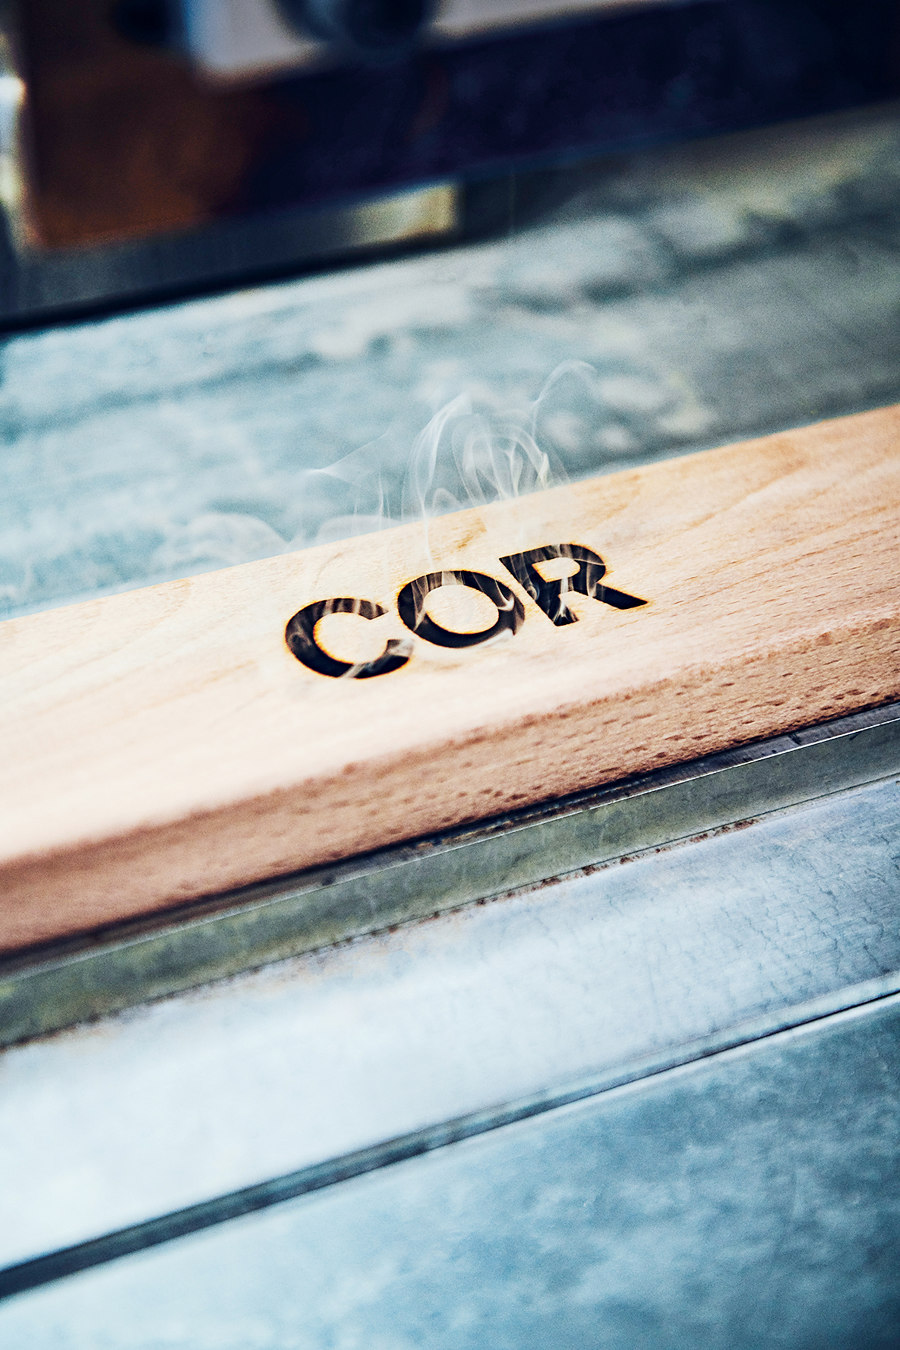 Design from the heart by COR | Novedades